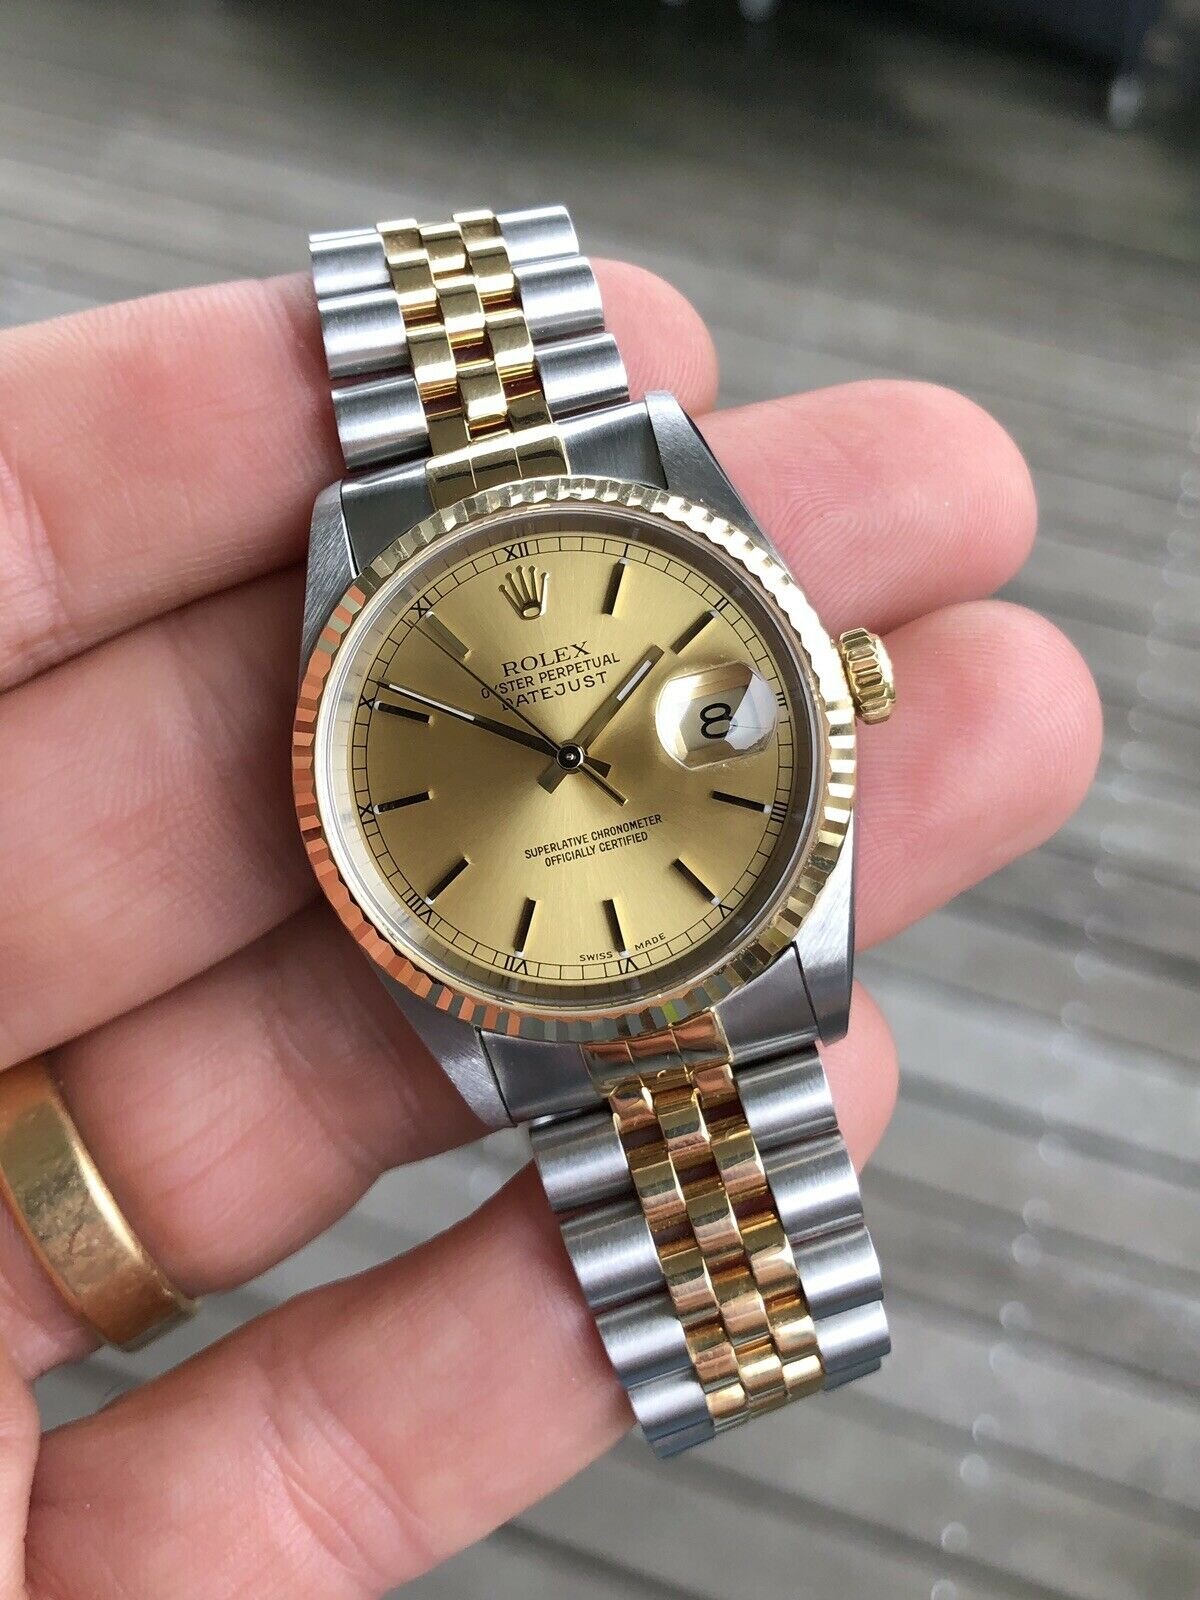 Rolex_Oyster_Perpetual_Datejust_SteelGold_36mm_I-Serial_16233_-_2001_Watch_Vault_01.jpg